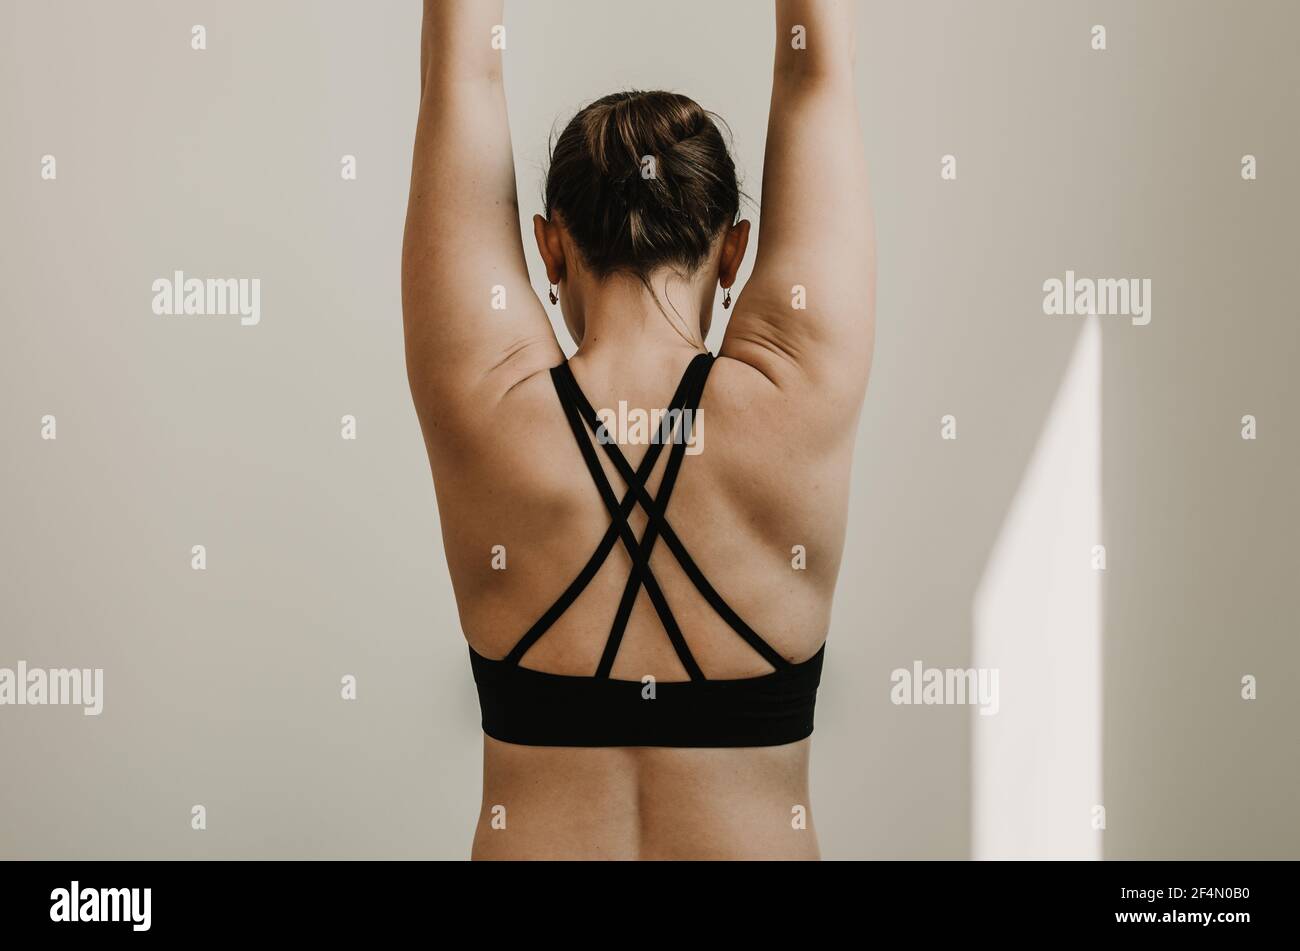 https://c8.alamy.com/comp/2F4N0B0/partial-upper-body-backside-portrait-of-a-woman-in-a-strappy-yoga-top-with-arms-raised-back-muscles-engaged-with-a-white-background-2F4N0B0.jpg